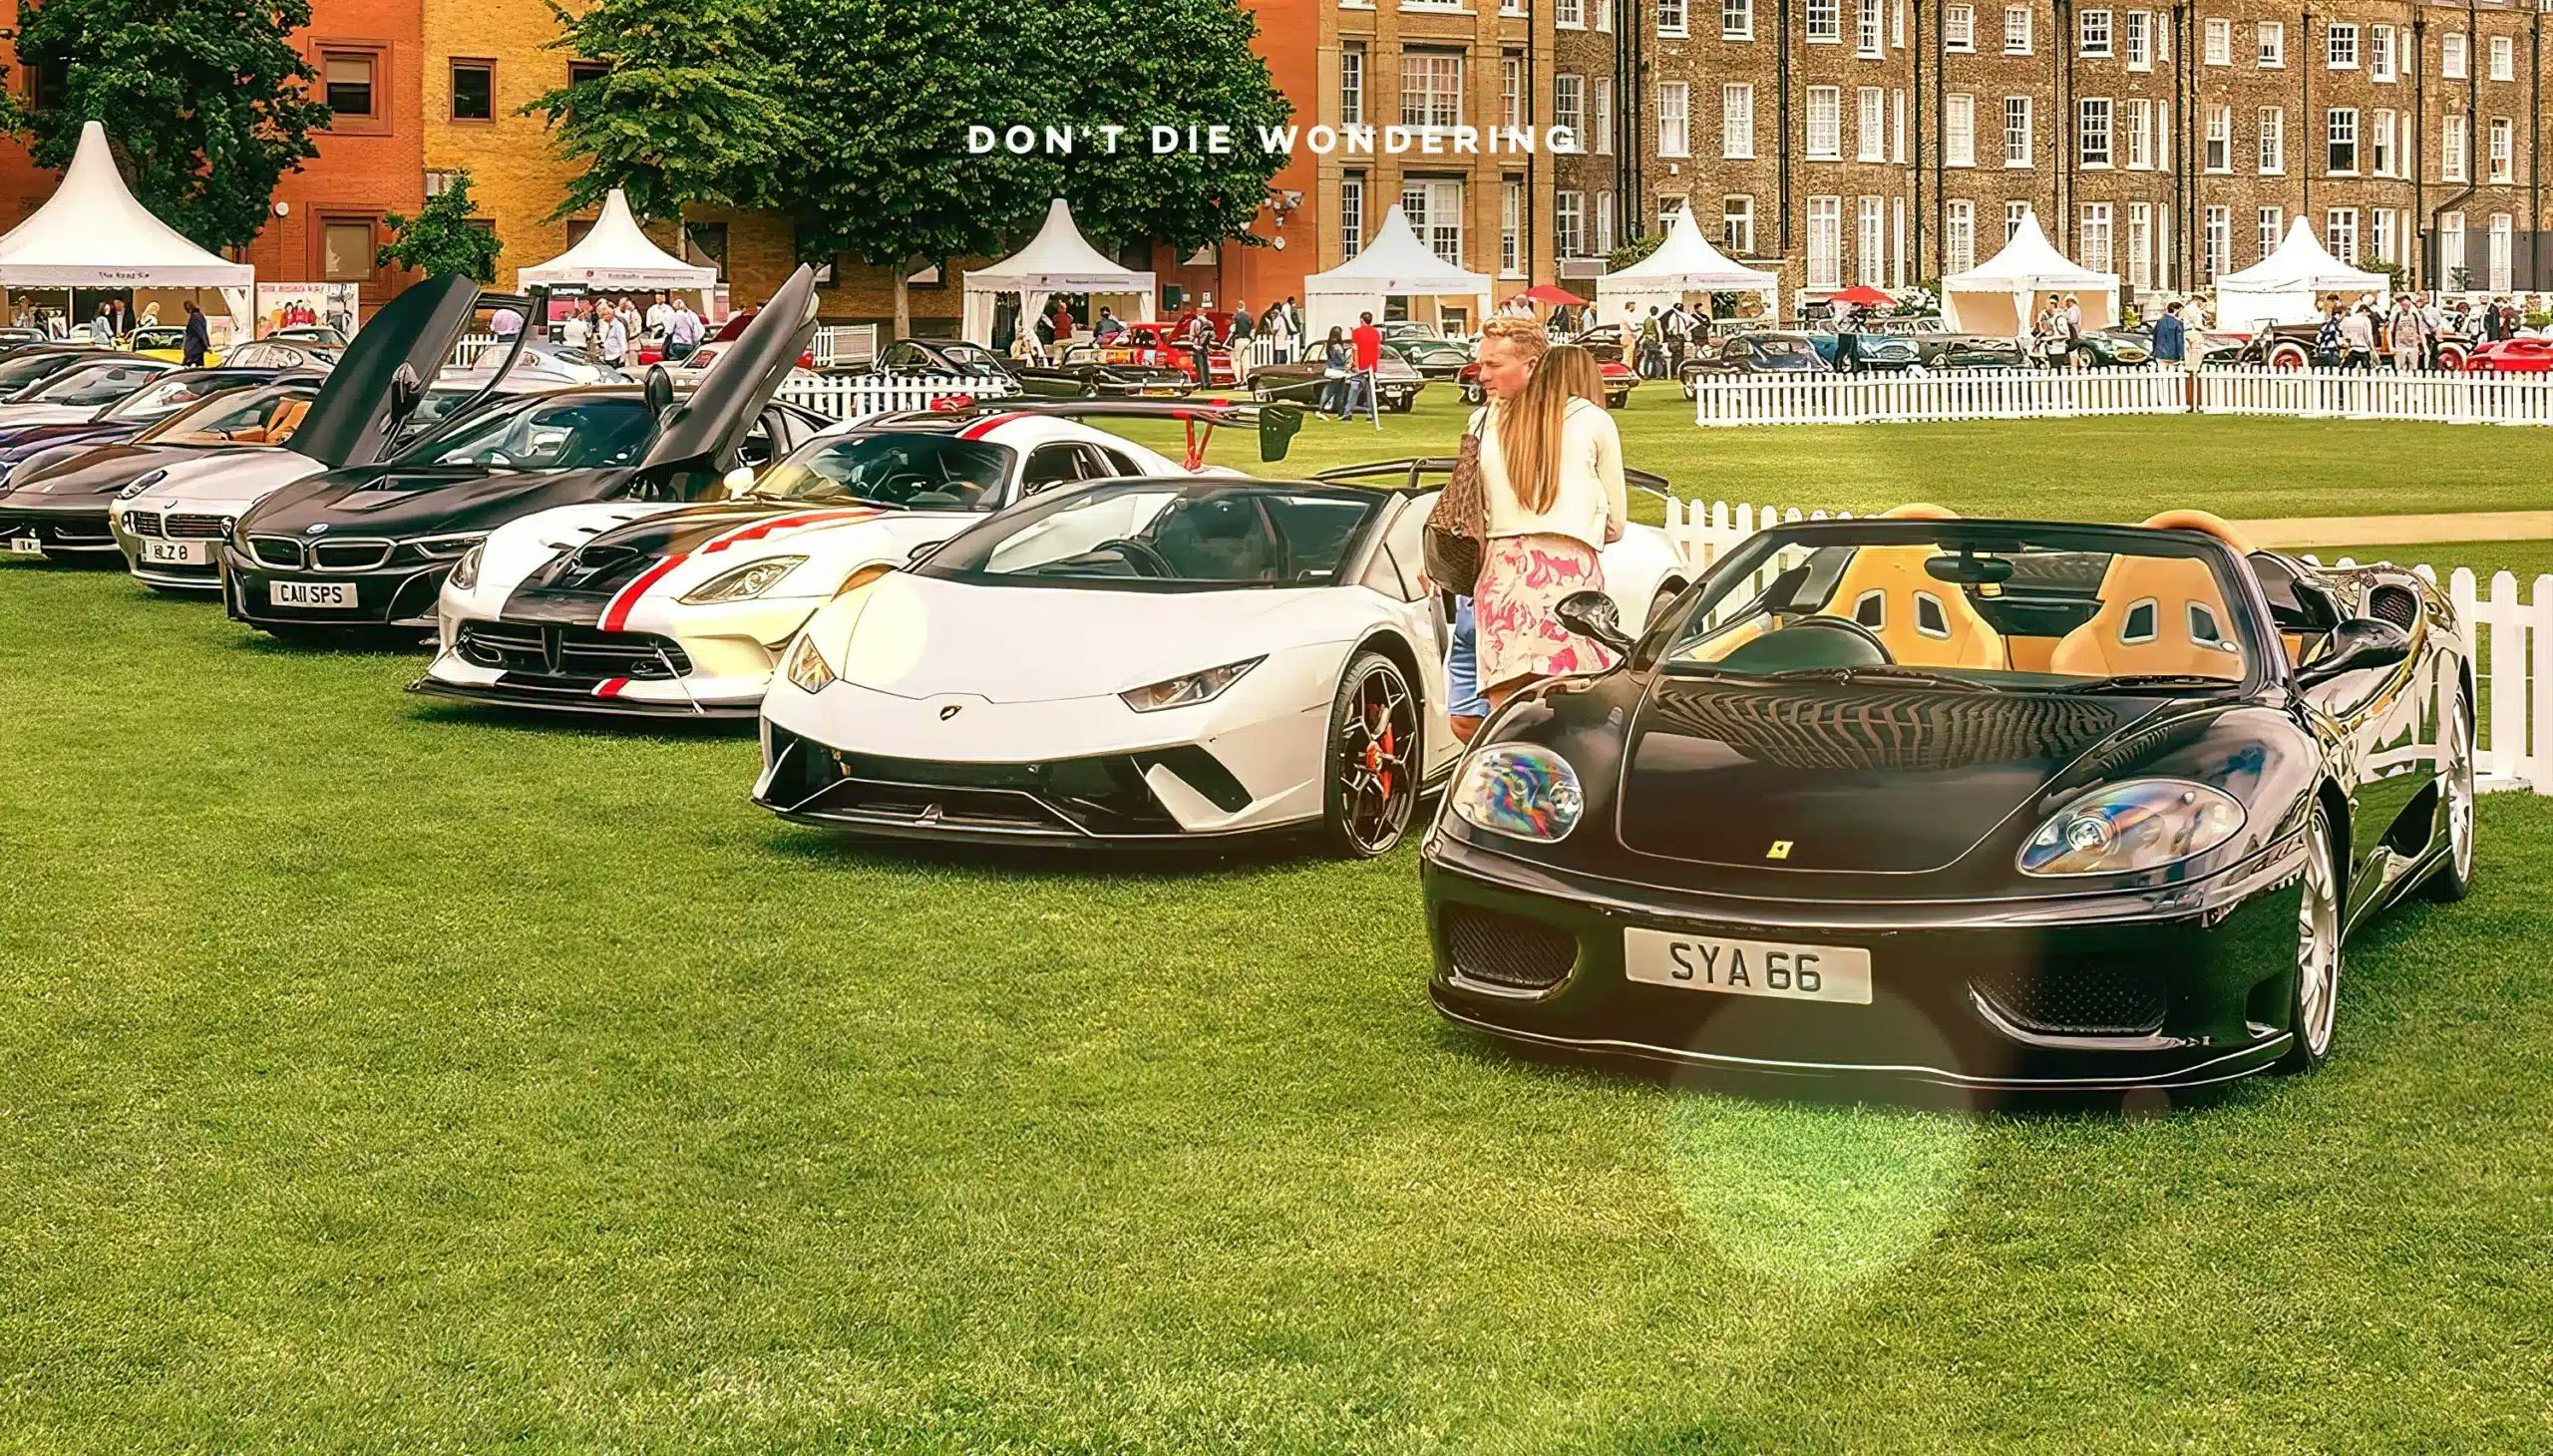 The London Concours: An Automotive Party in The Heart of London